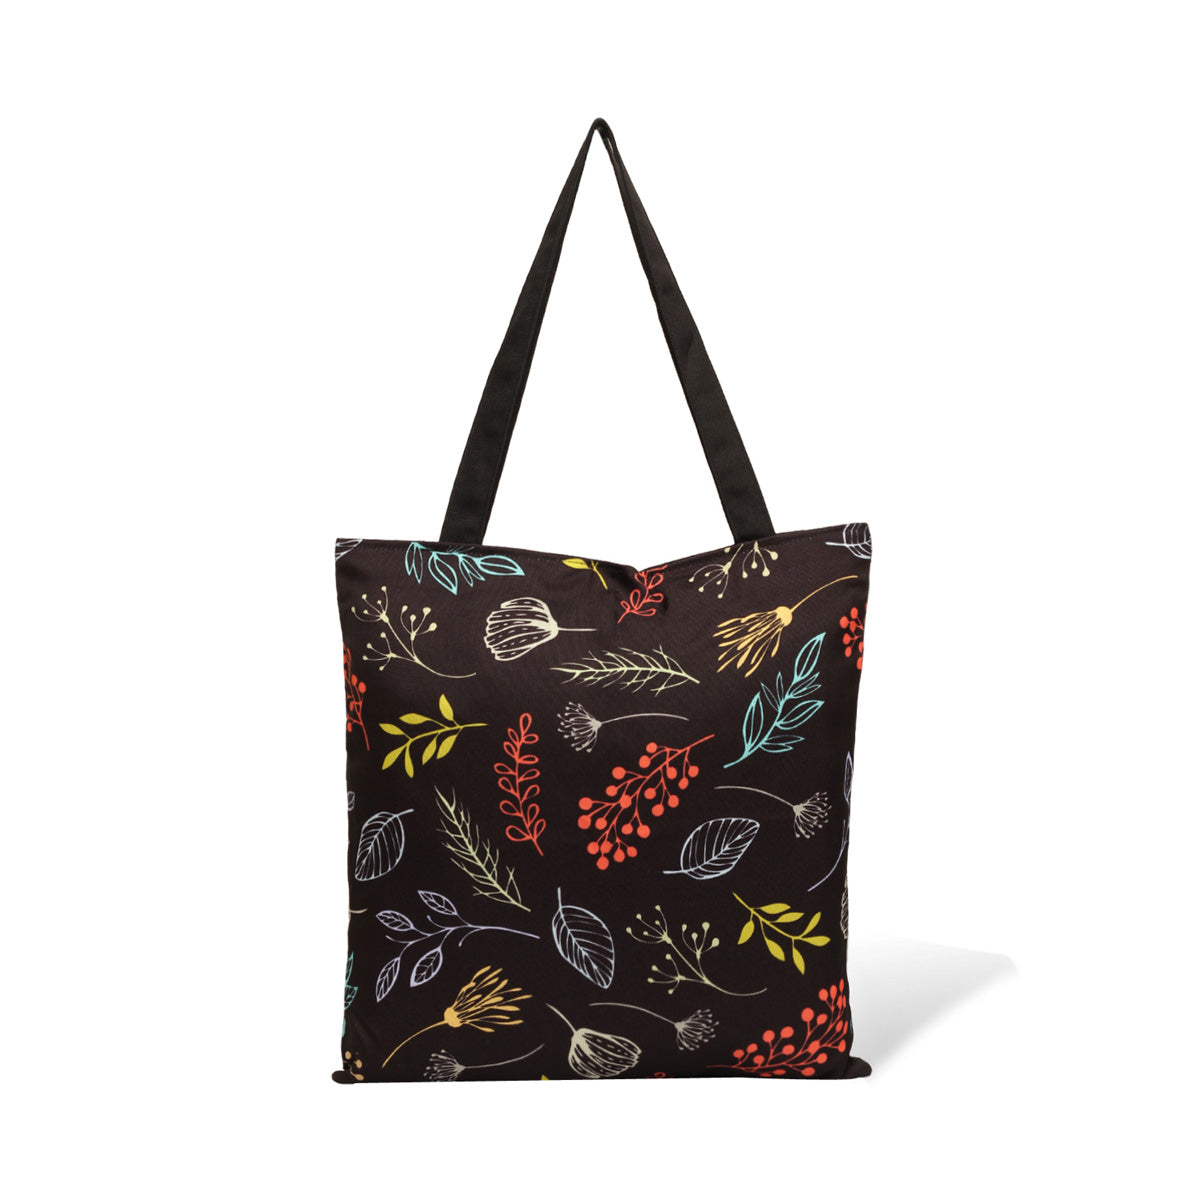 Colorful foliage and flowers decorate a black tote bag.